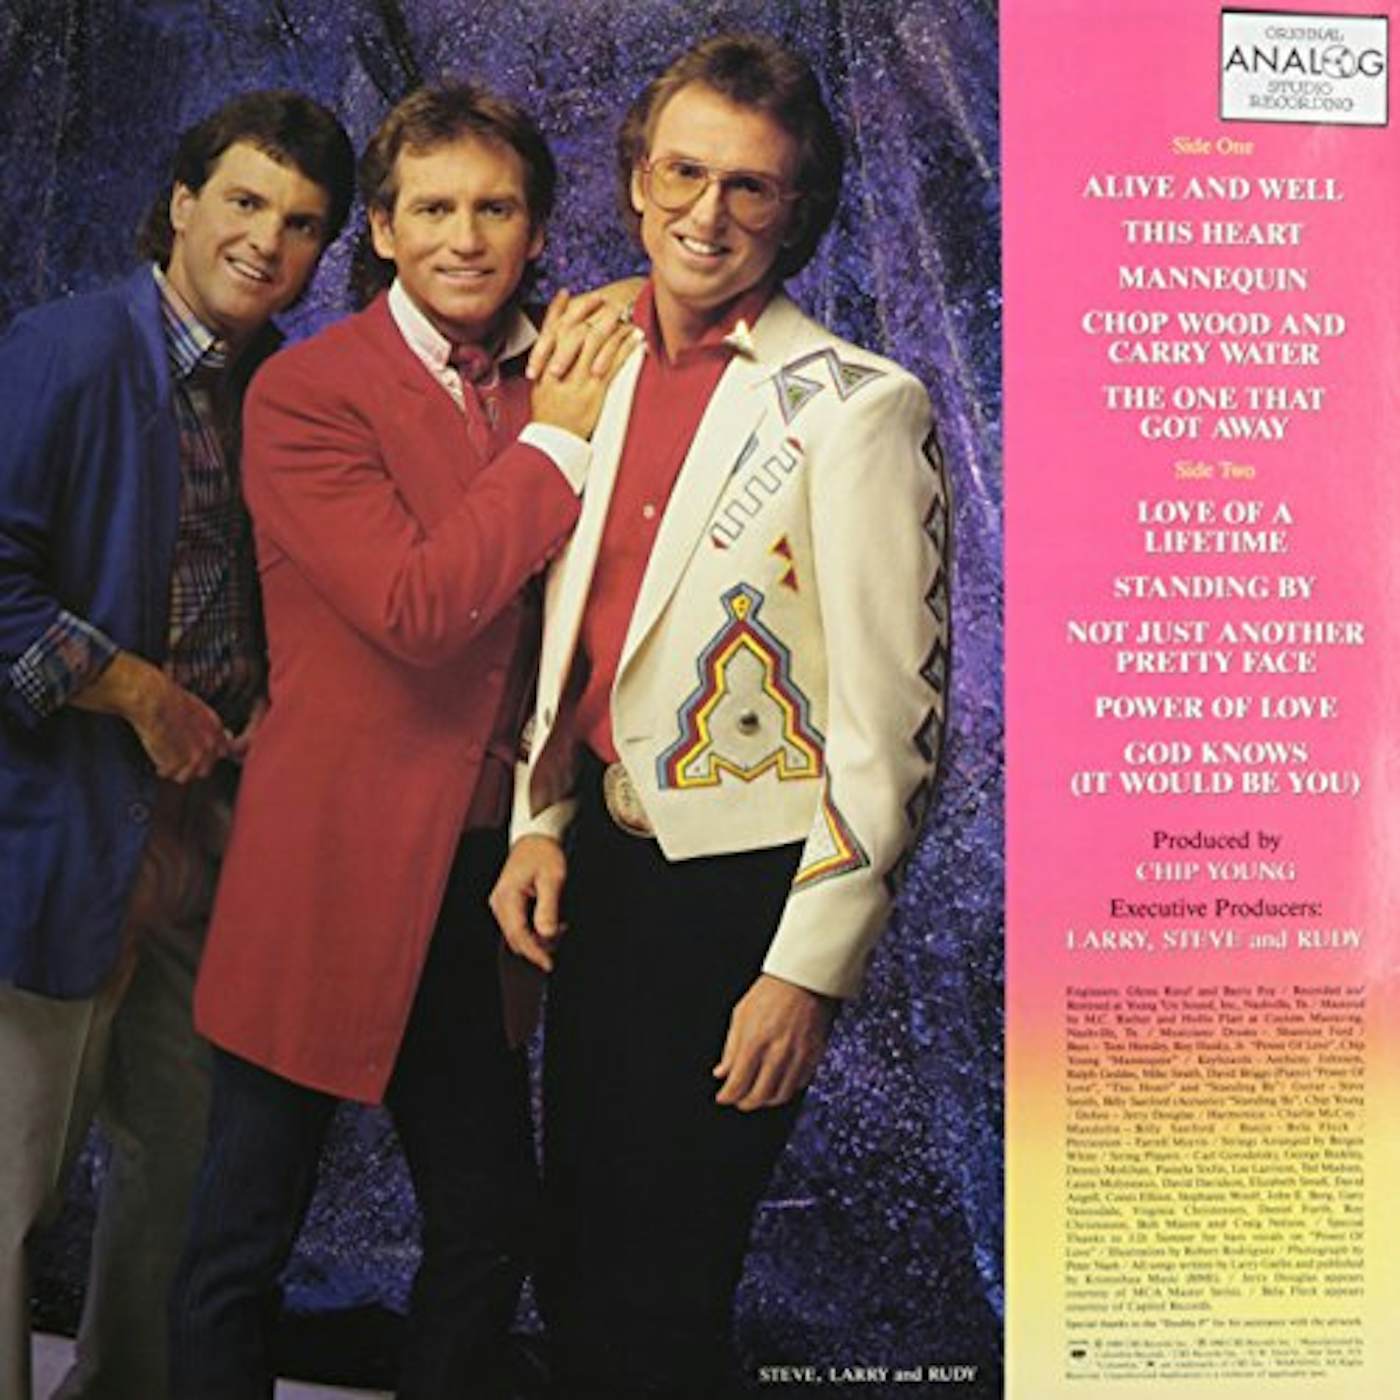 Larry Gatlin & The Gatlin Brothers 114249 ALIVE AND WELL LIVIN IN THE LAND OF DREAMS Vinyl Record